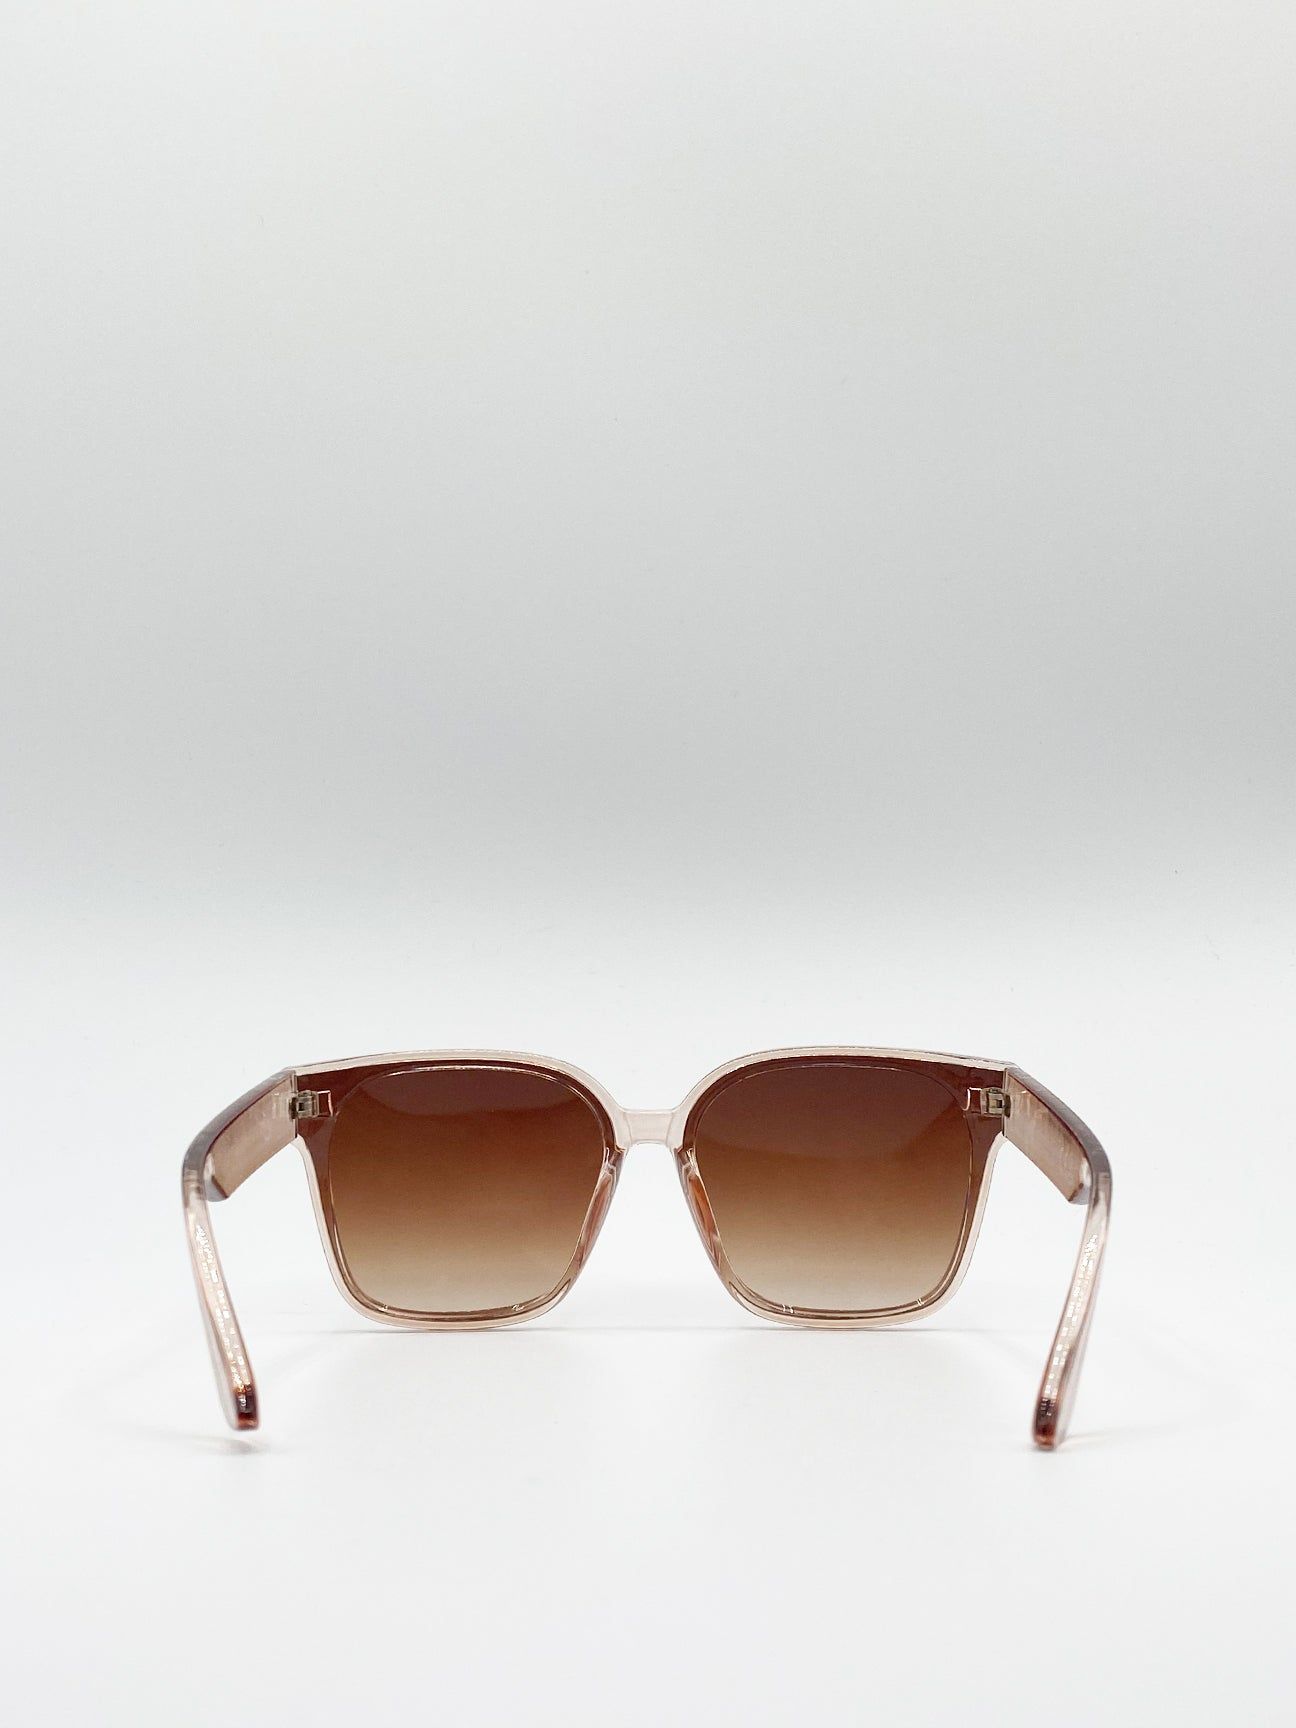 Oversized Cateye Sunglasses In Crystal Sand
Frame Colour: Crystal Sand
Lens Colour: Brown Grad
Frame Material: Plastic
One Size
FDA Approved
UV 400 PROTECTION IN ACCORDANCE WITH 89/686/EEC BS EN ISO 123-1:2013
SKU: SG80207190